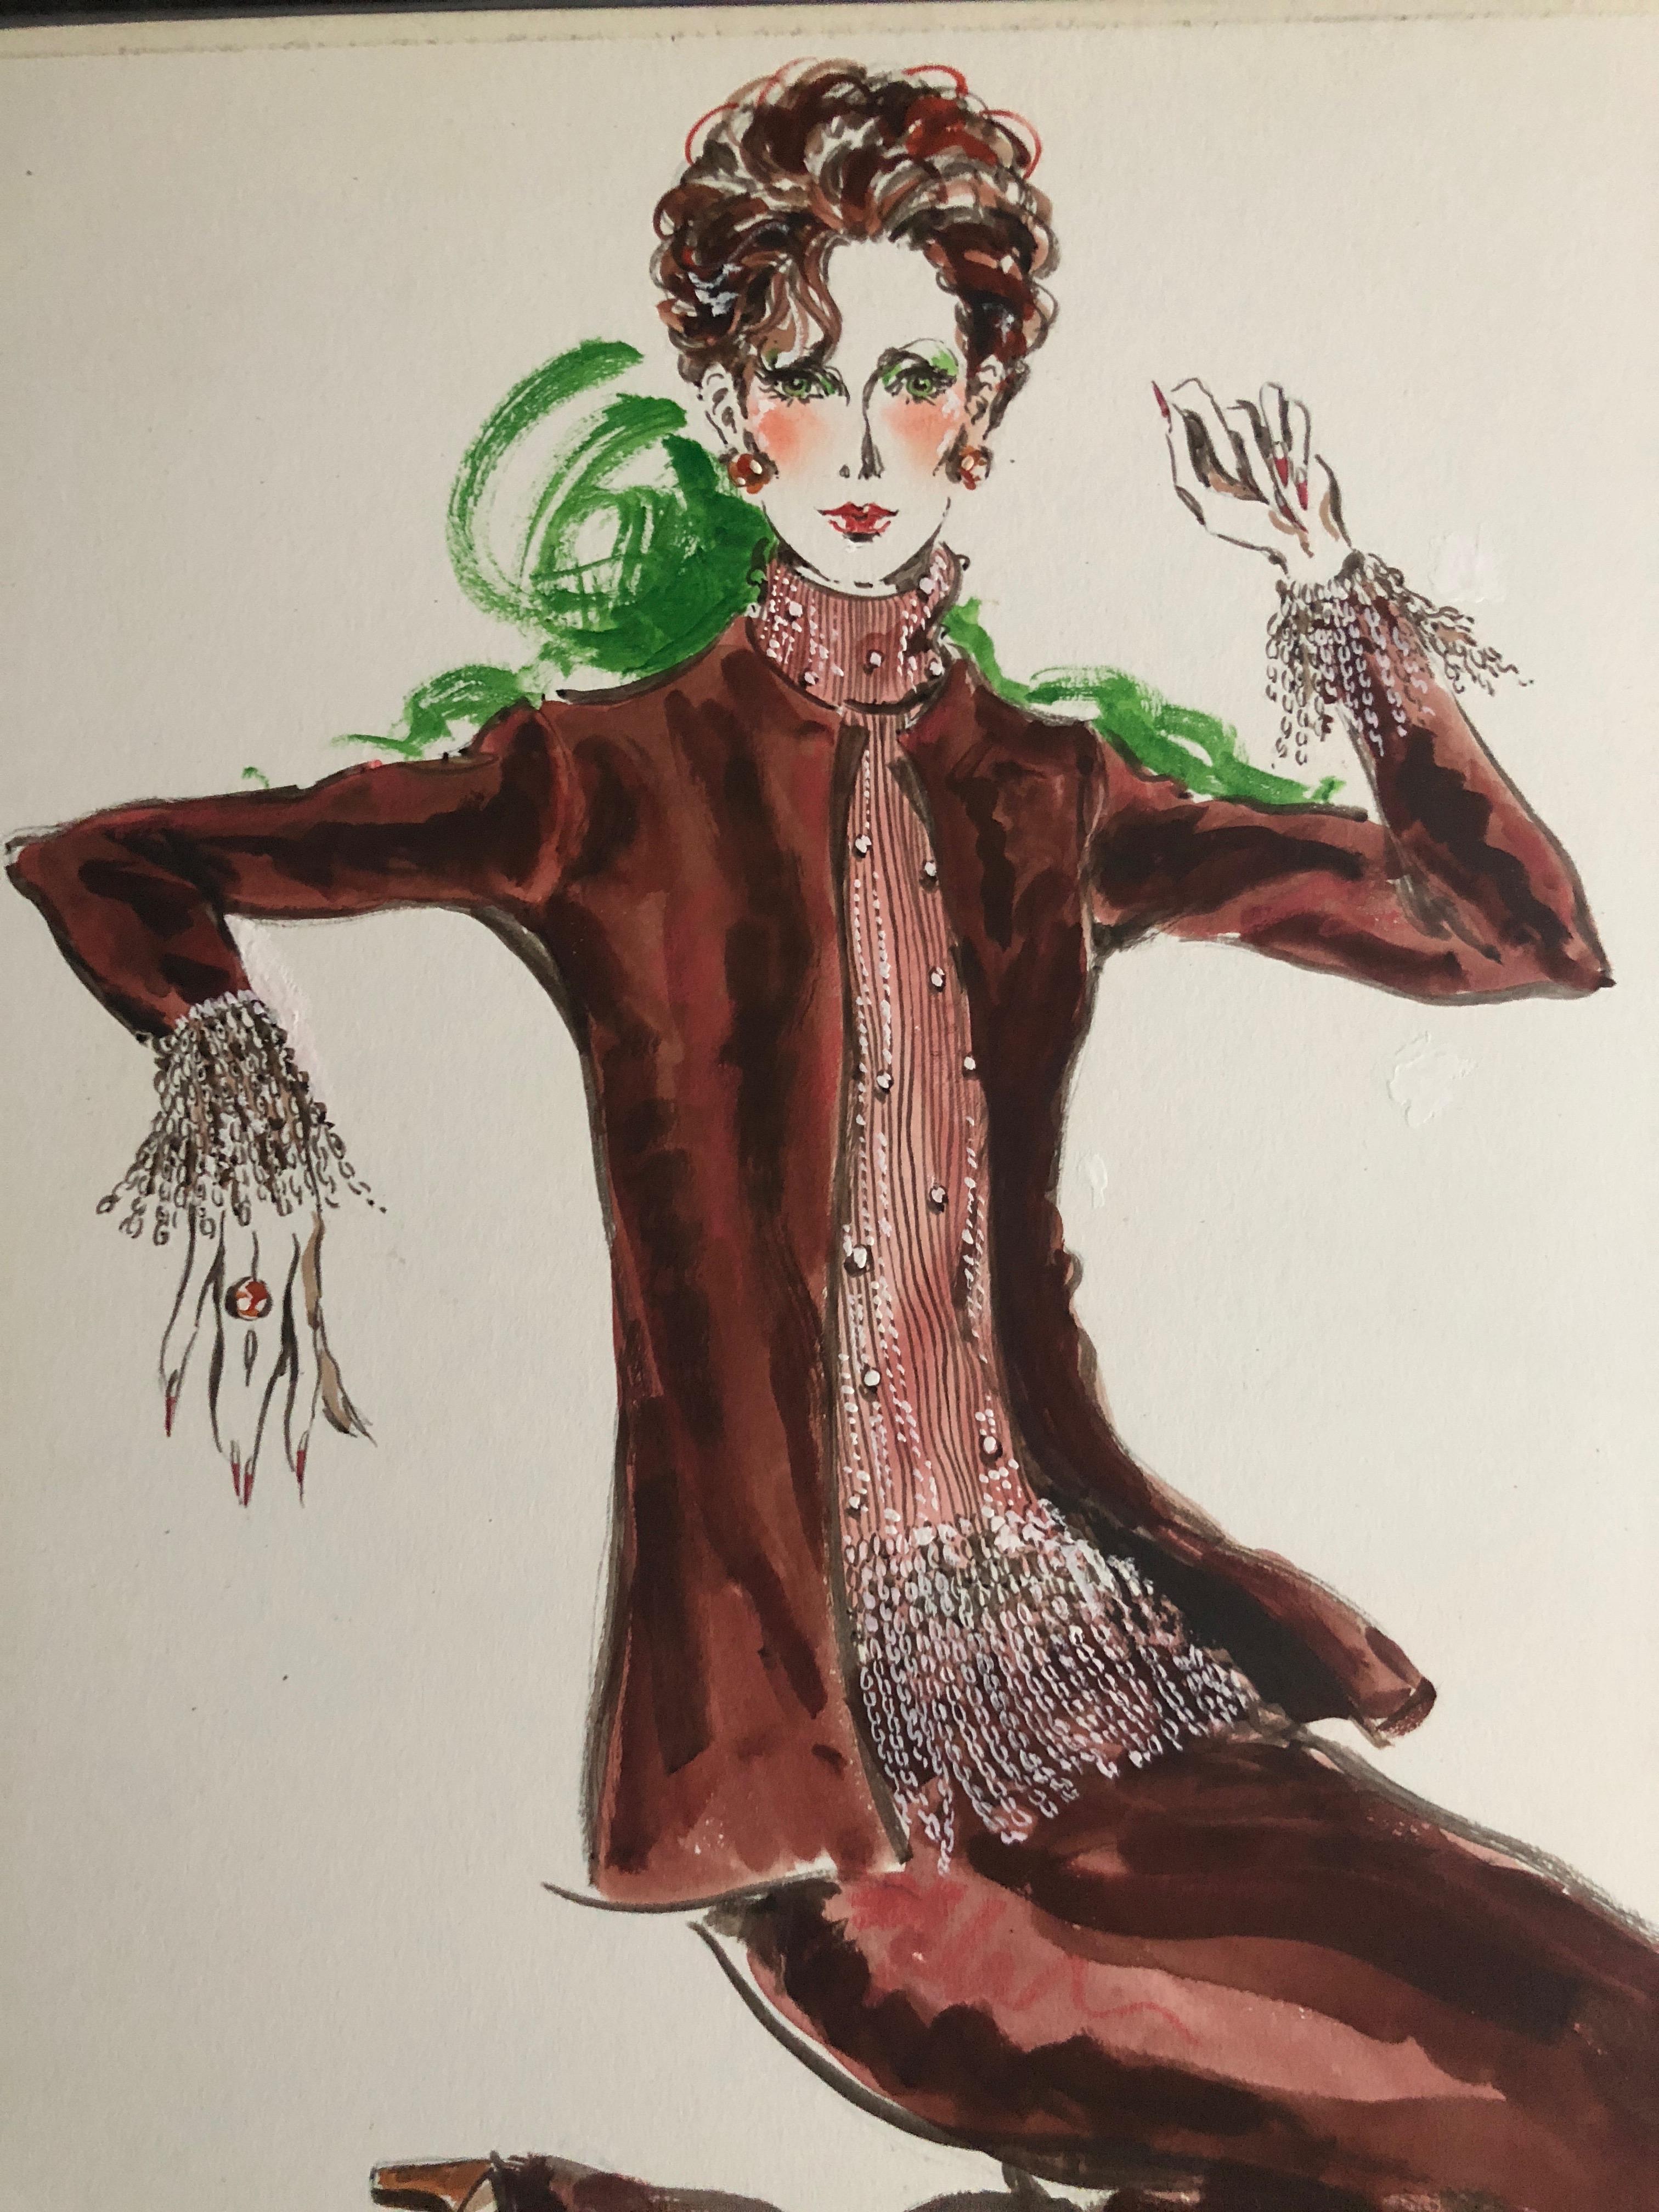 Cardinali Fashion 1970's Original Fashion Illustration by Robert W. Richards In Excellent Condition For Sale In Cloverdale, CA